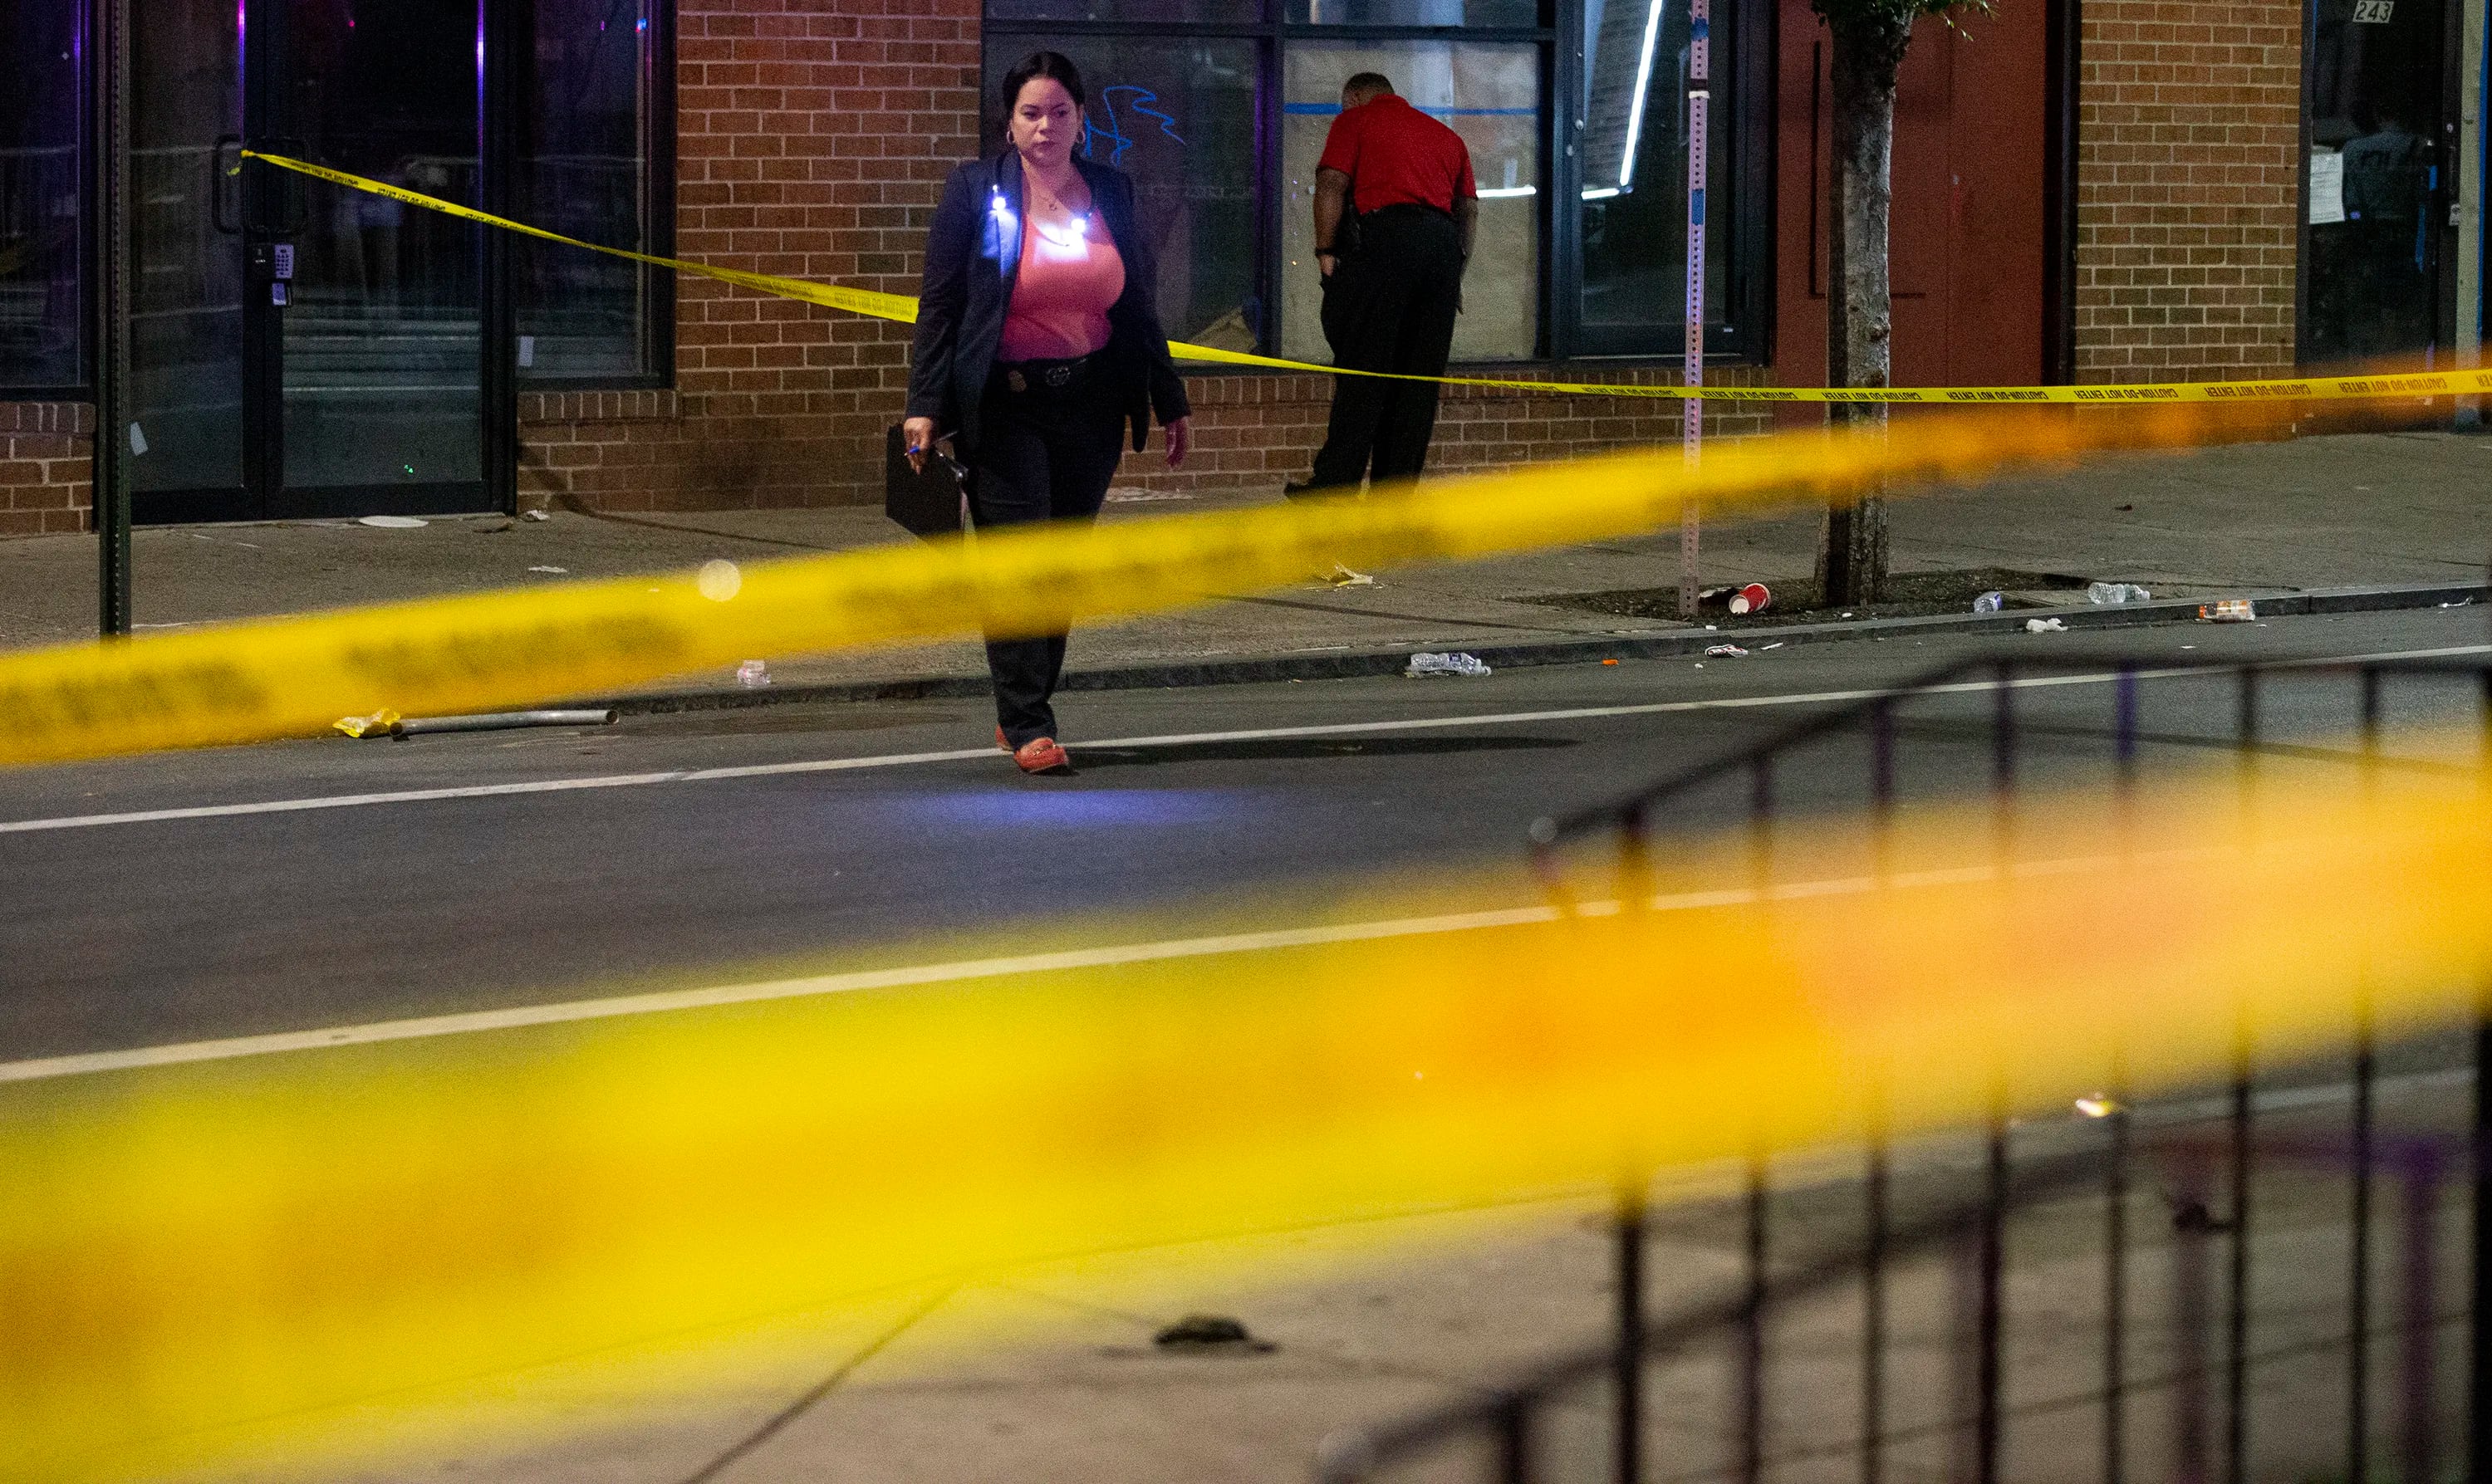 Philadelphia Police detectives look over the scene of a shooting on and near South Street that left 3 dead and 11 wounded.